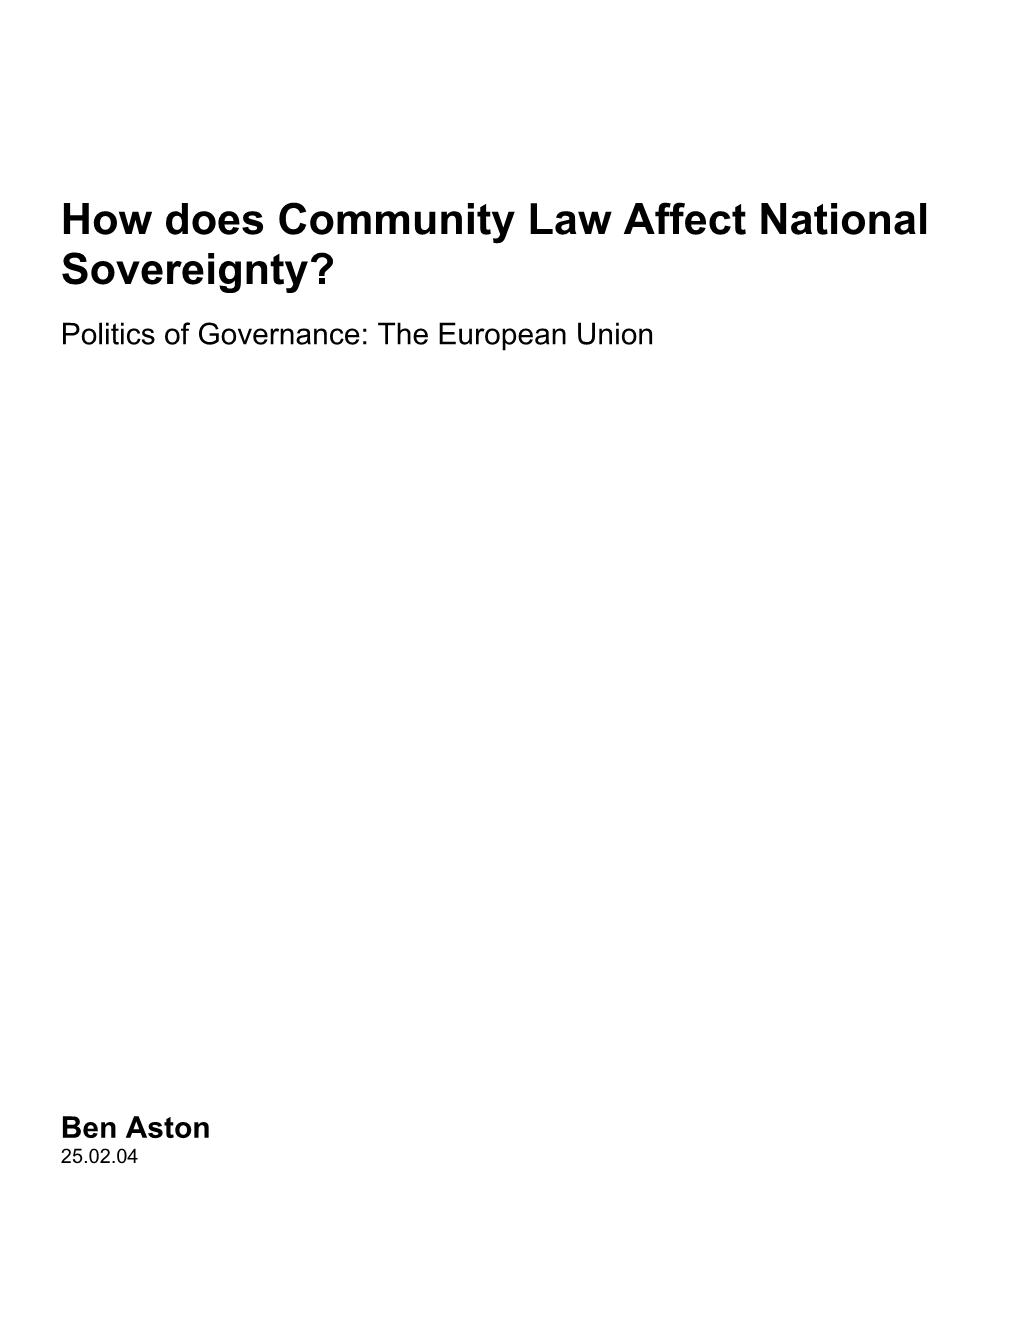 How Does Community Law Affect National Sovereignty